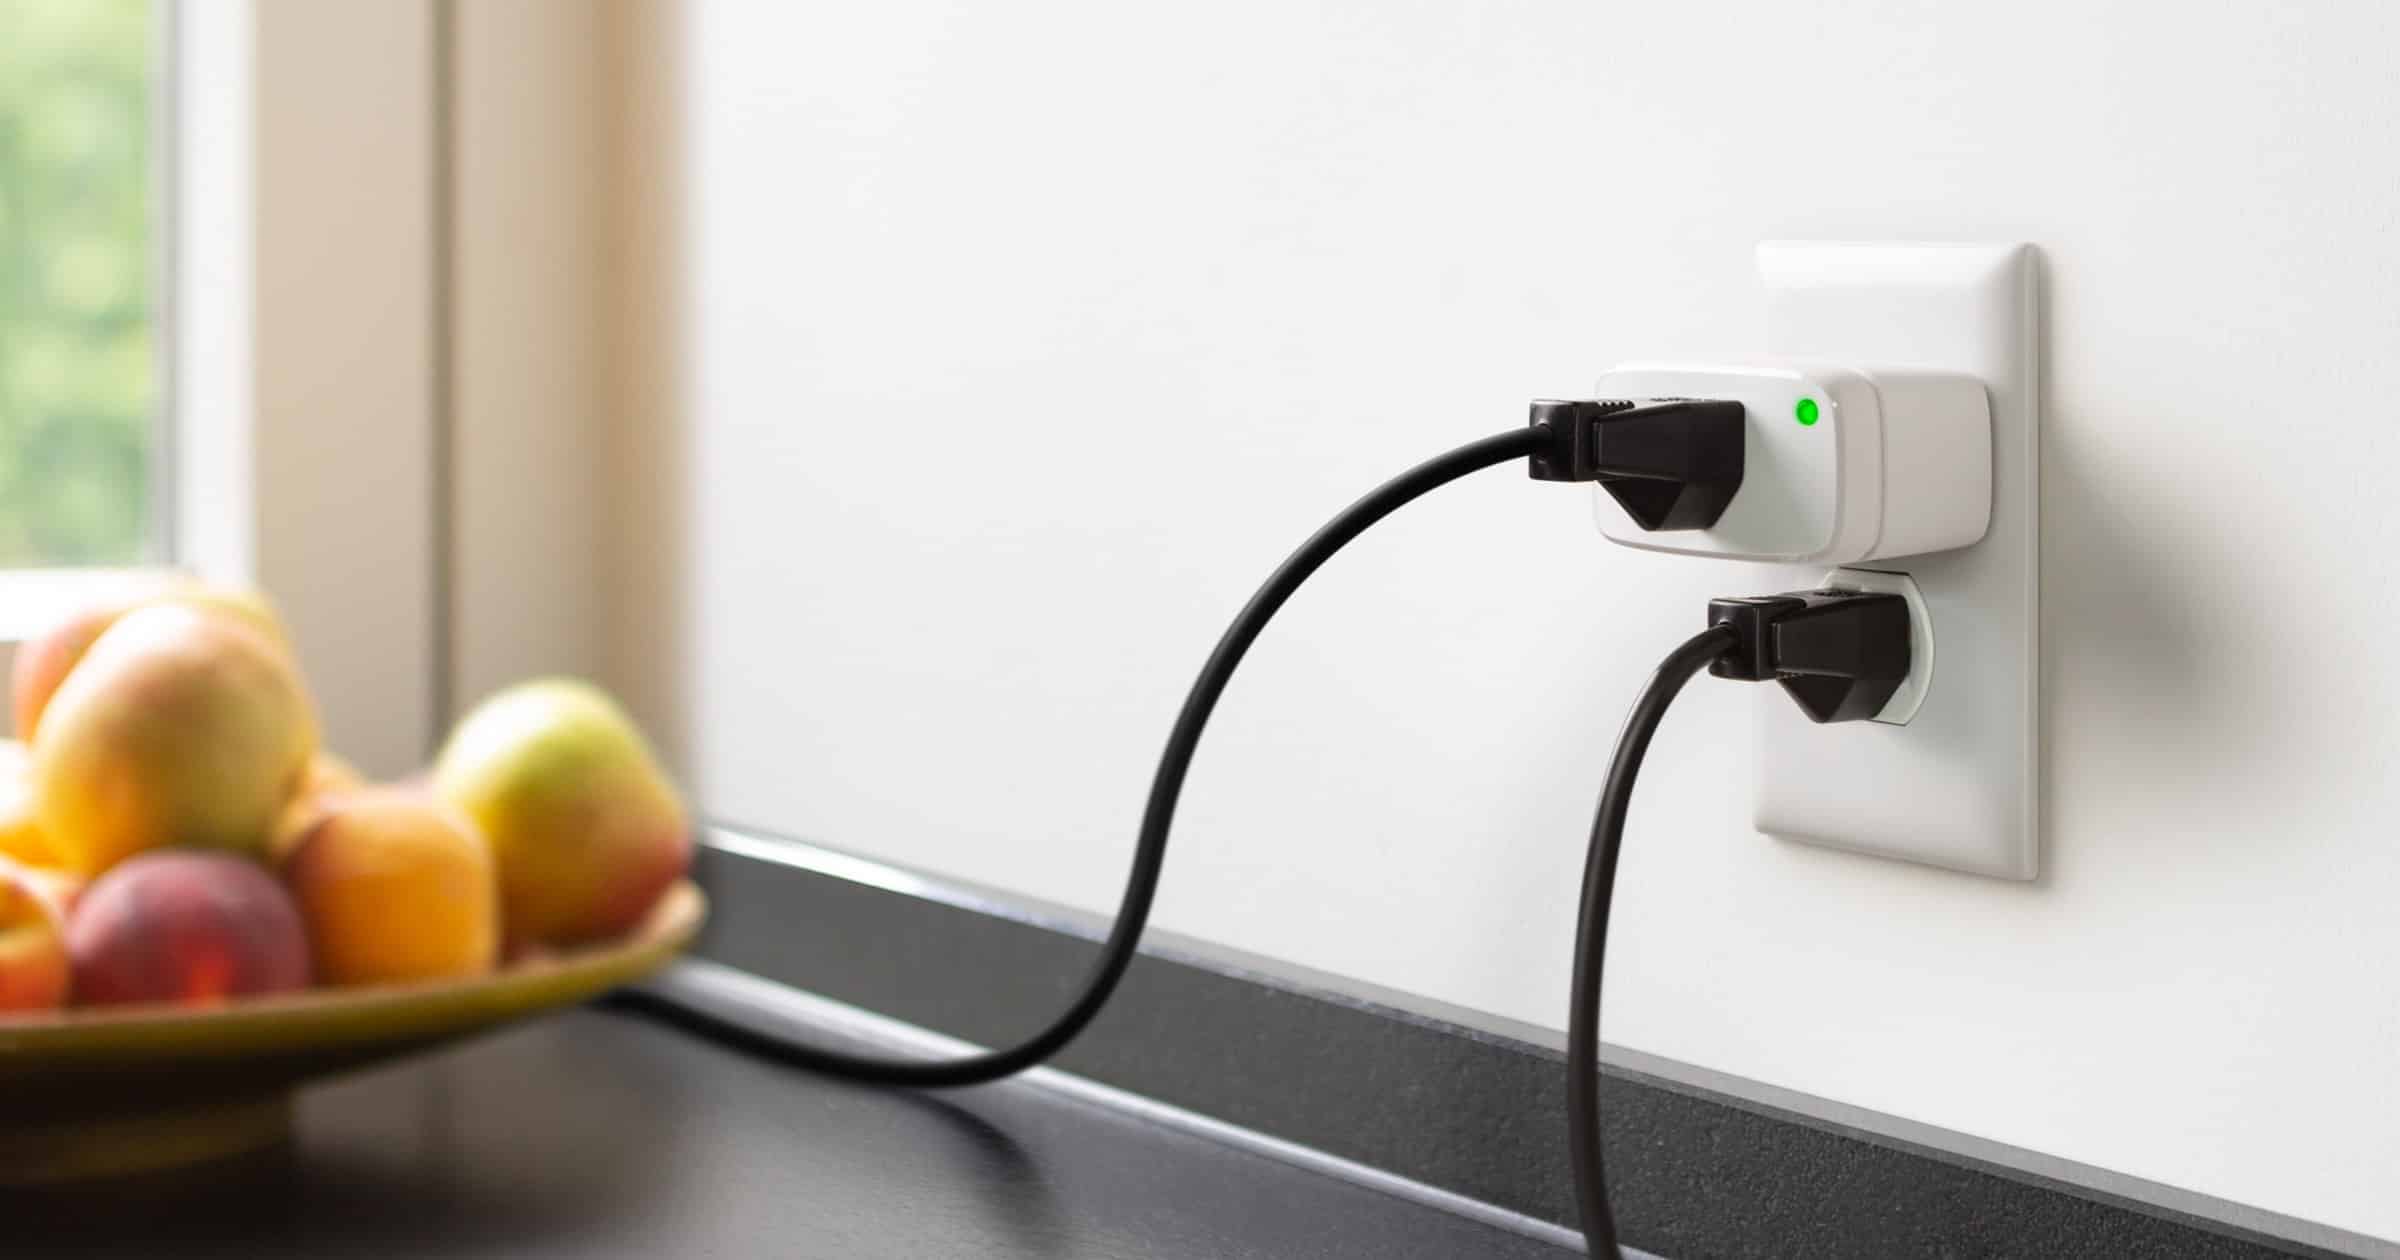 Eve Energy Smart Plug With Thread Available to Purchase